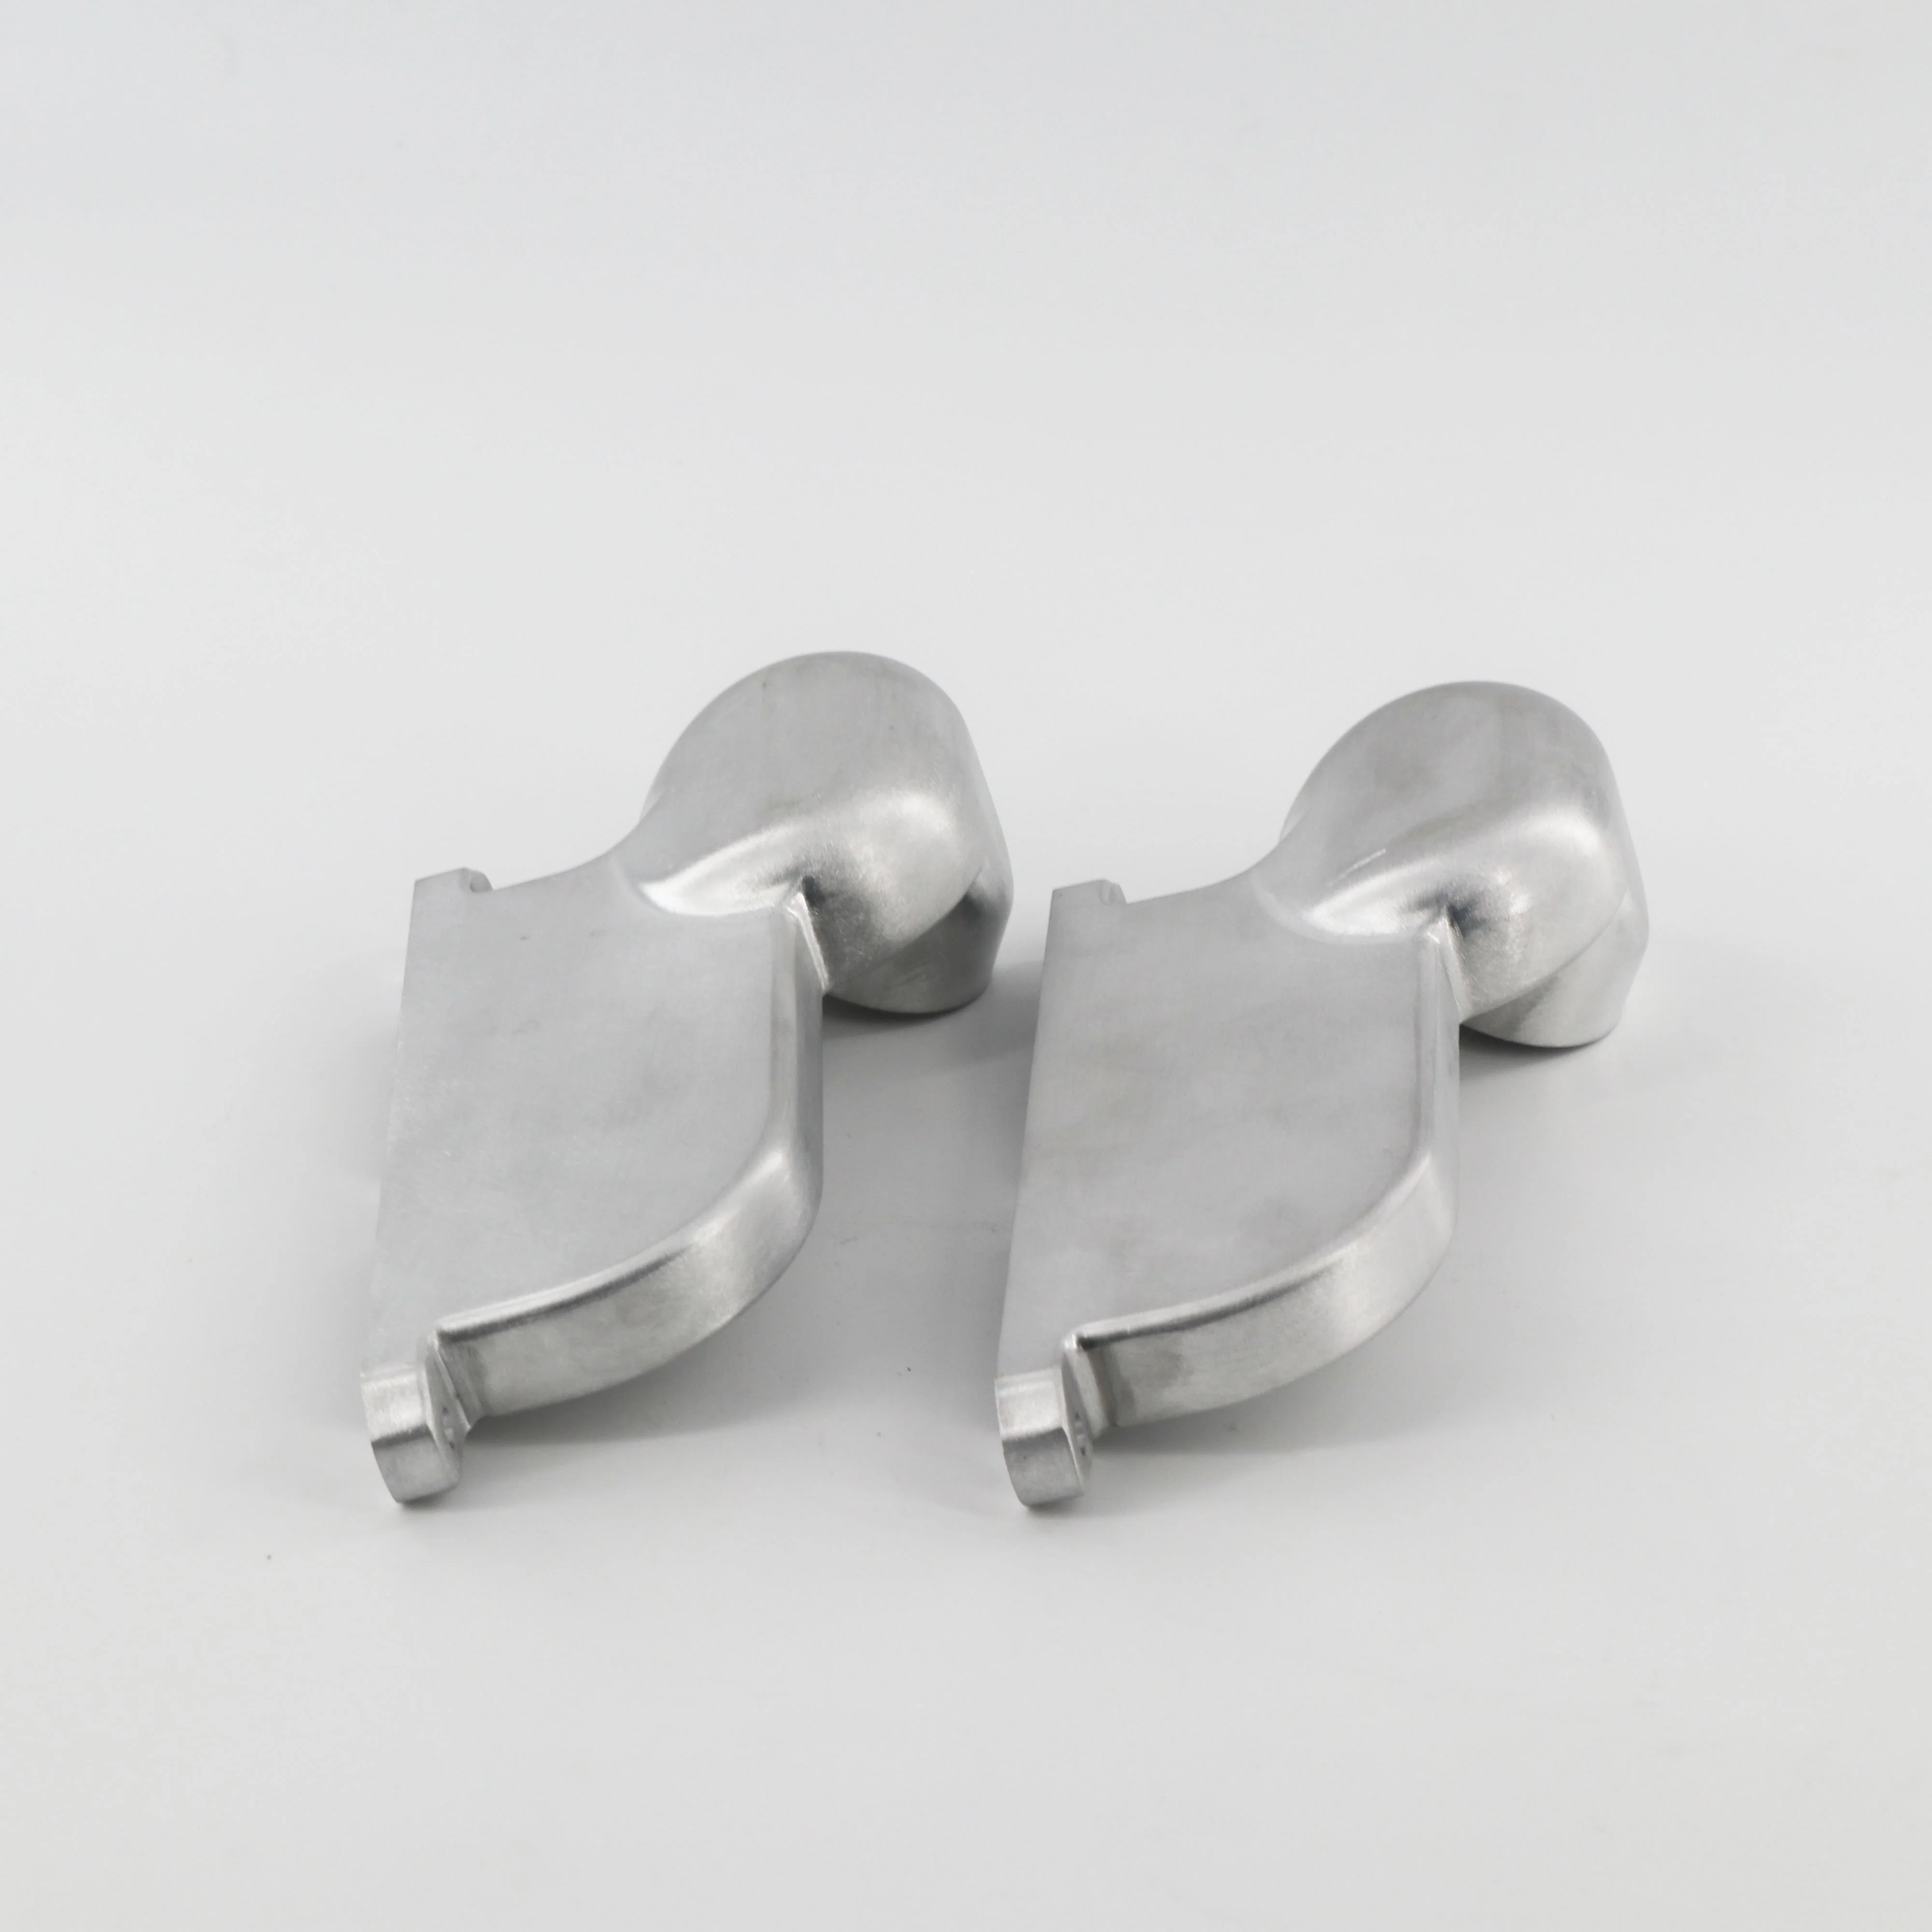 2023 CNC Turning CNC Milling Customized Machining Parts Aluminium Stainless Steel Alloy Cooper